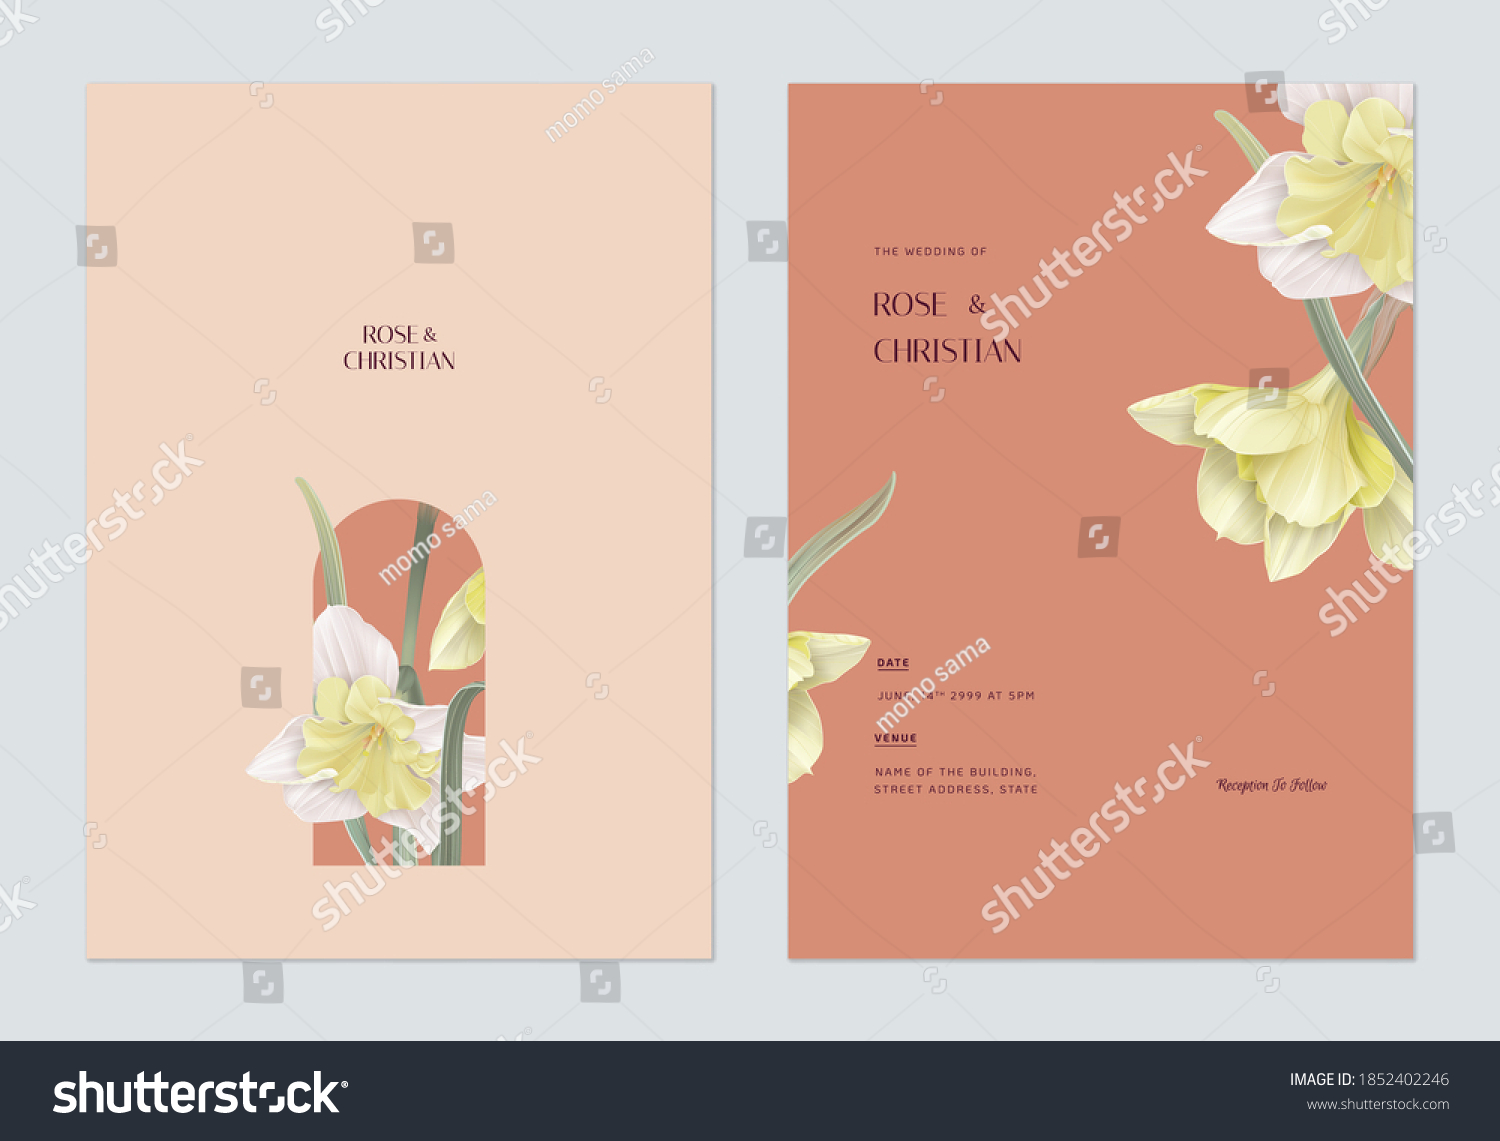 SVG of Floral wedding invitation card template design, Daffodil flowers with leaves on red svg